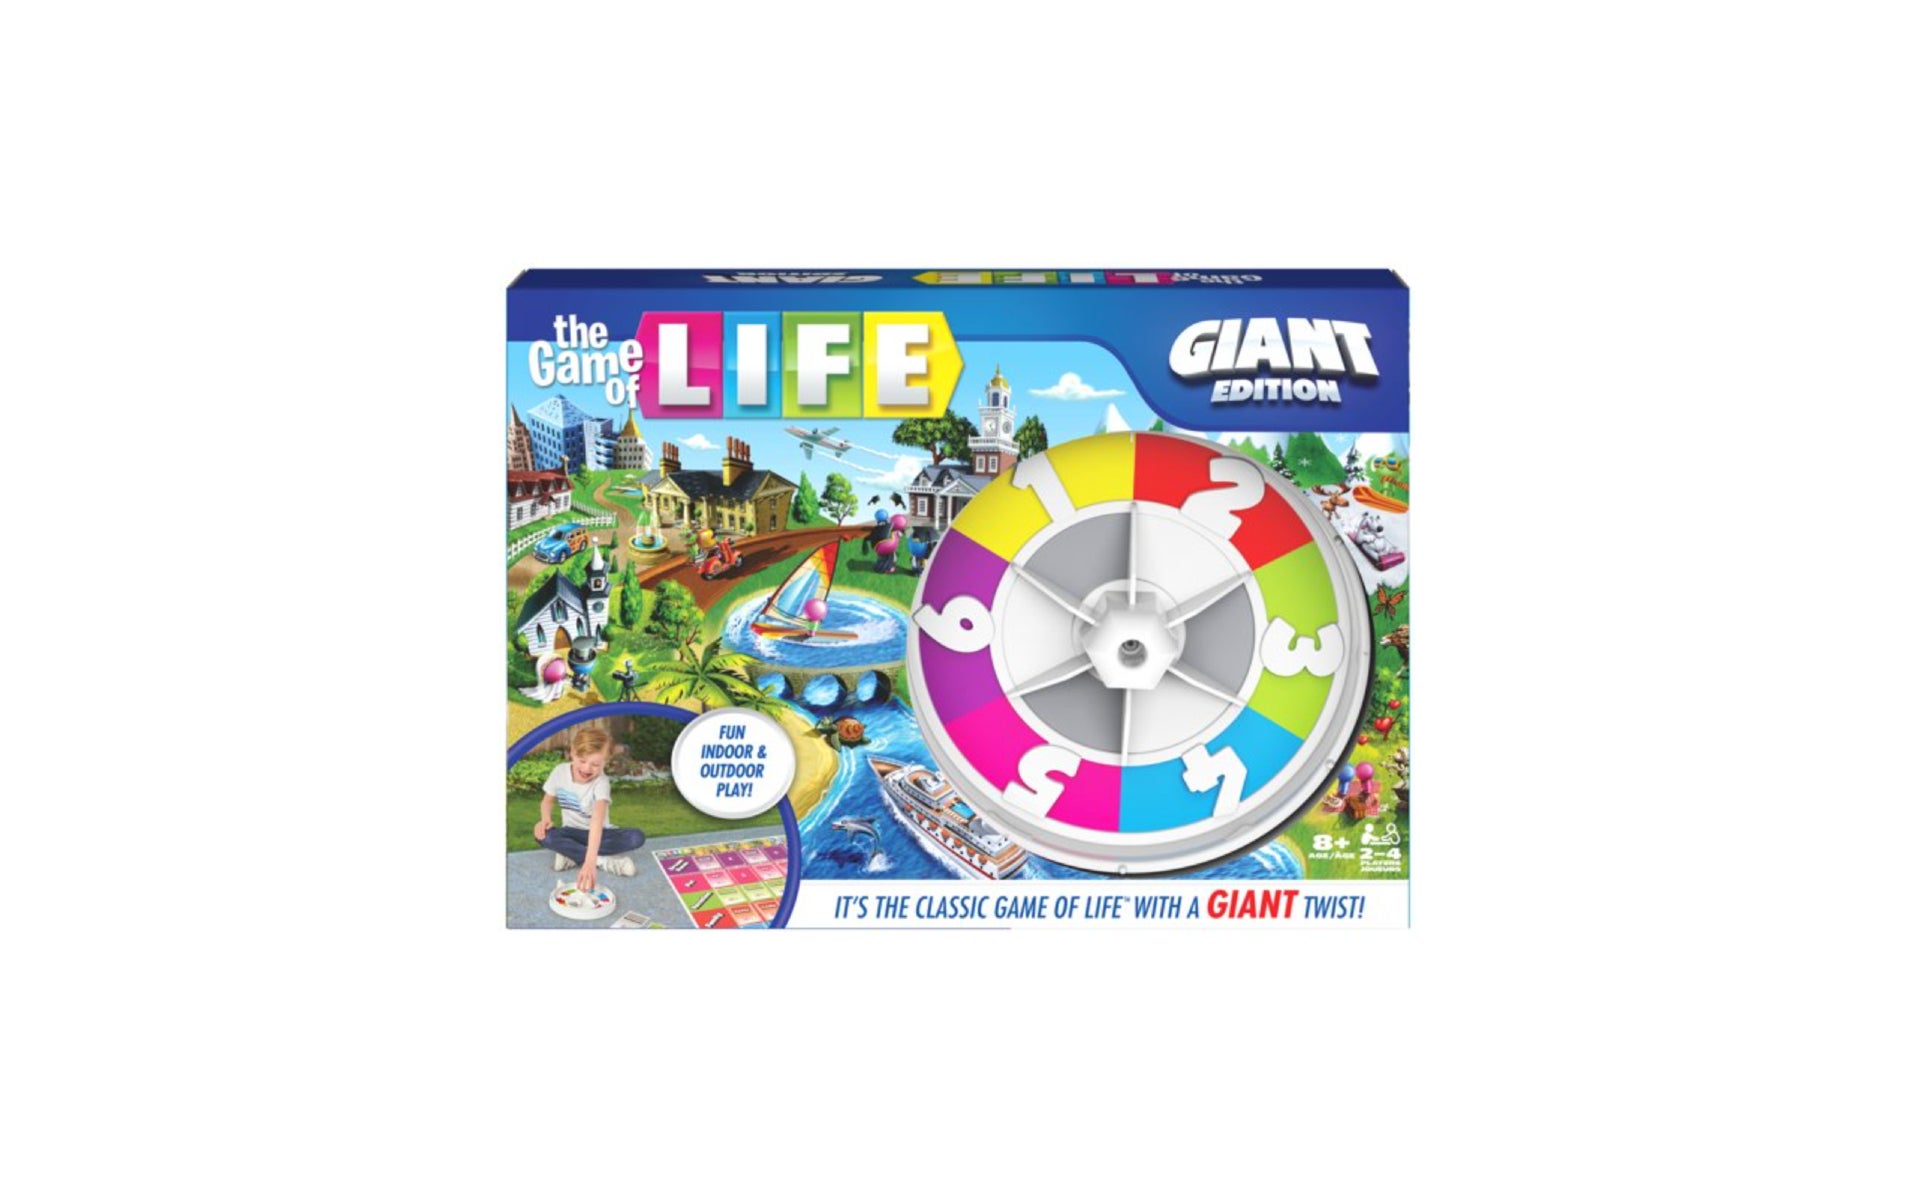 The Game of Life Giant Edition